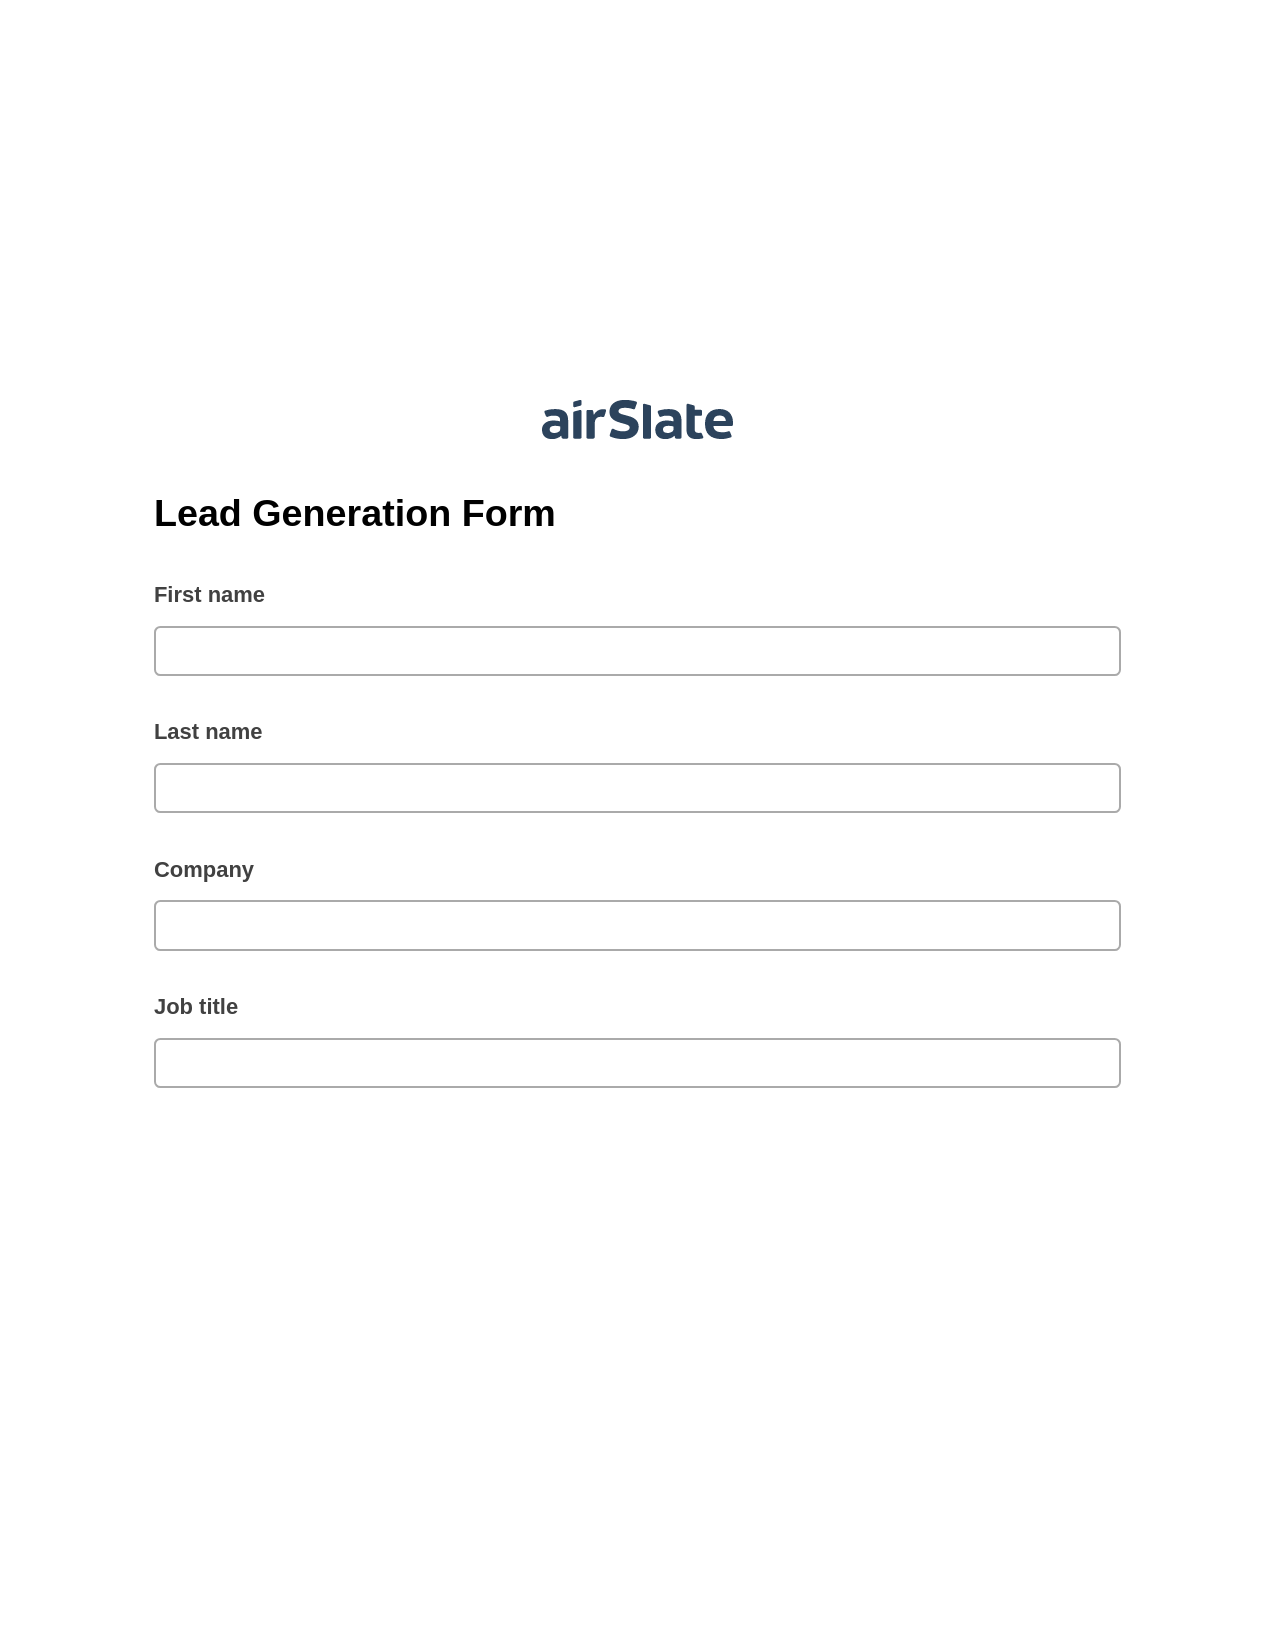 Lead Generation Form Pre-fill Dropdowns from Airtable, Remove Tags From Slate Bot, Archive to Dropbox Bot